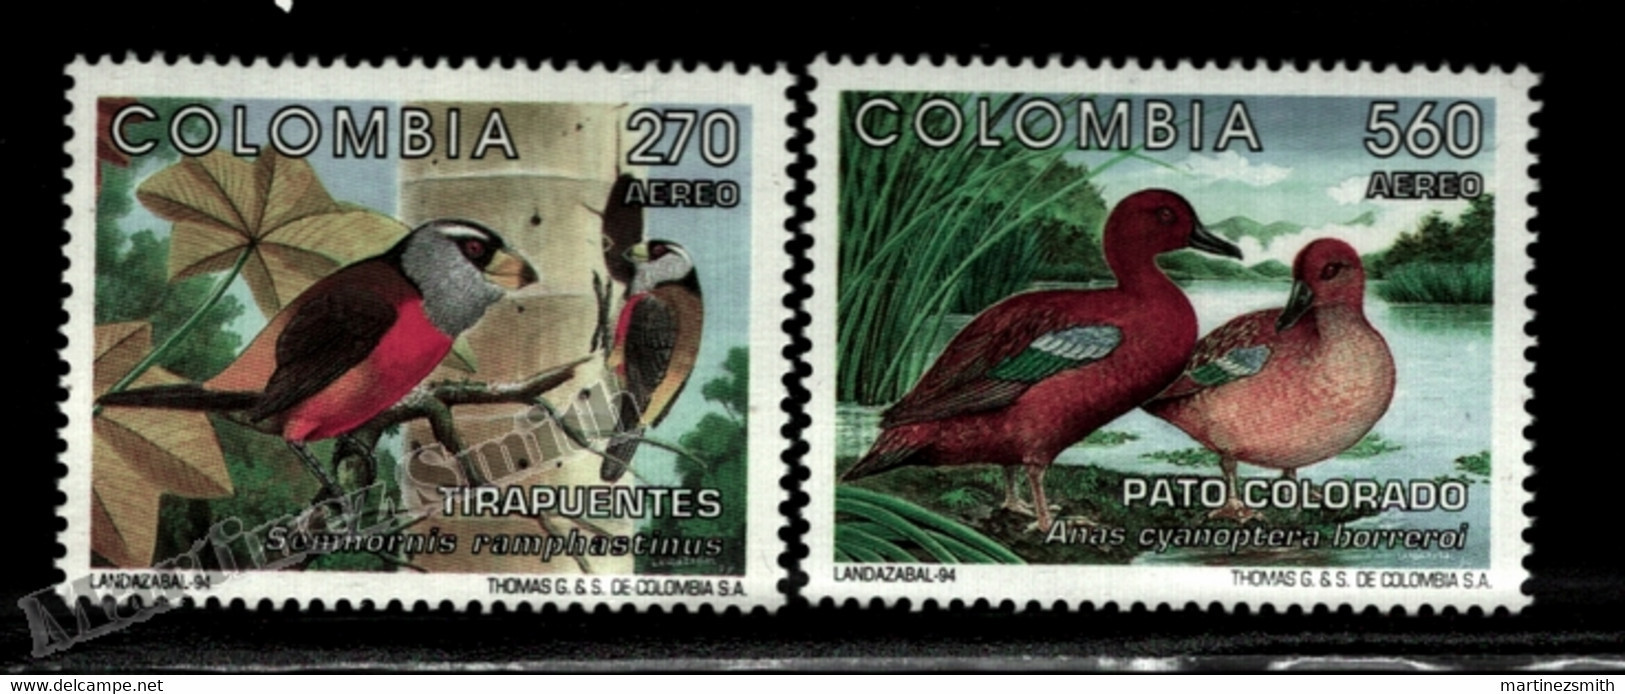 Colombie Colombia 1994 Yvert Airmail 882-83, Fauna, Birds - MNH - Colombia